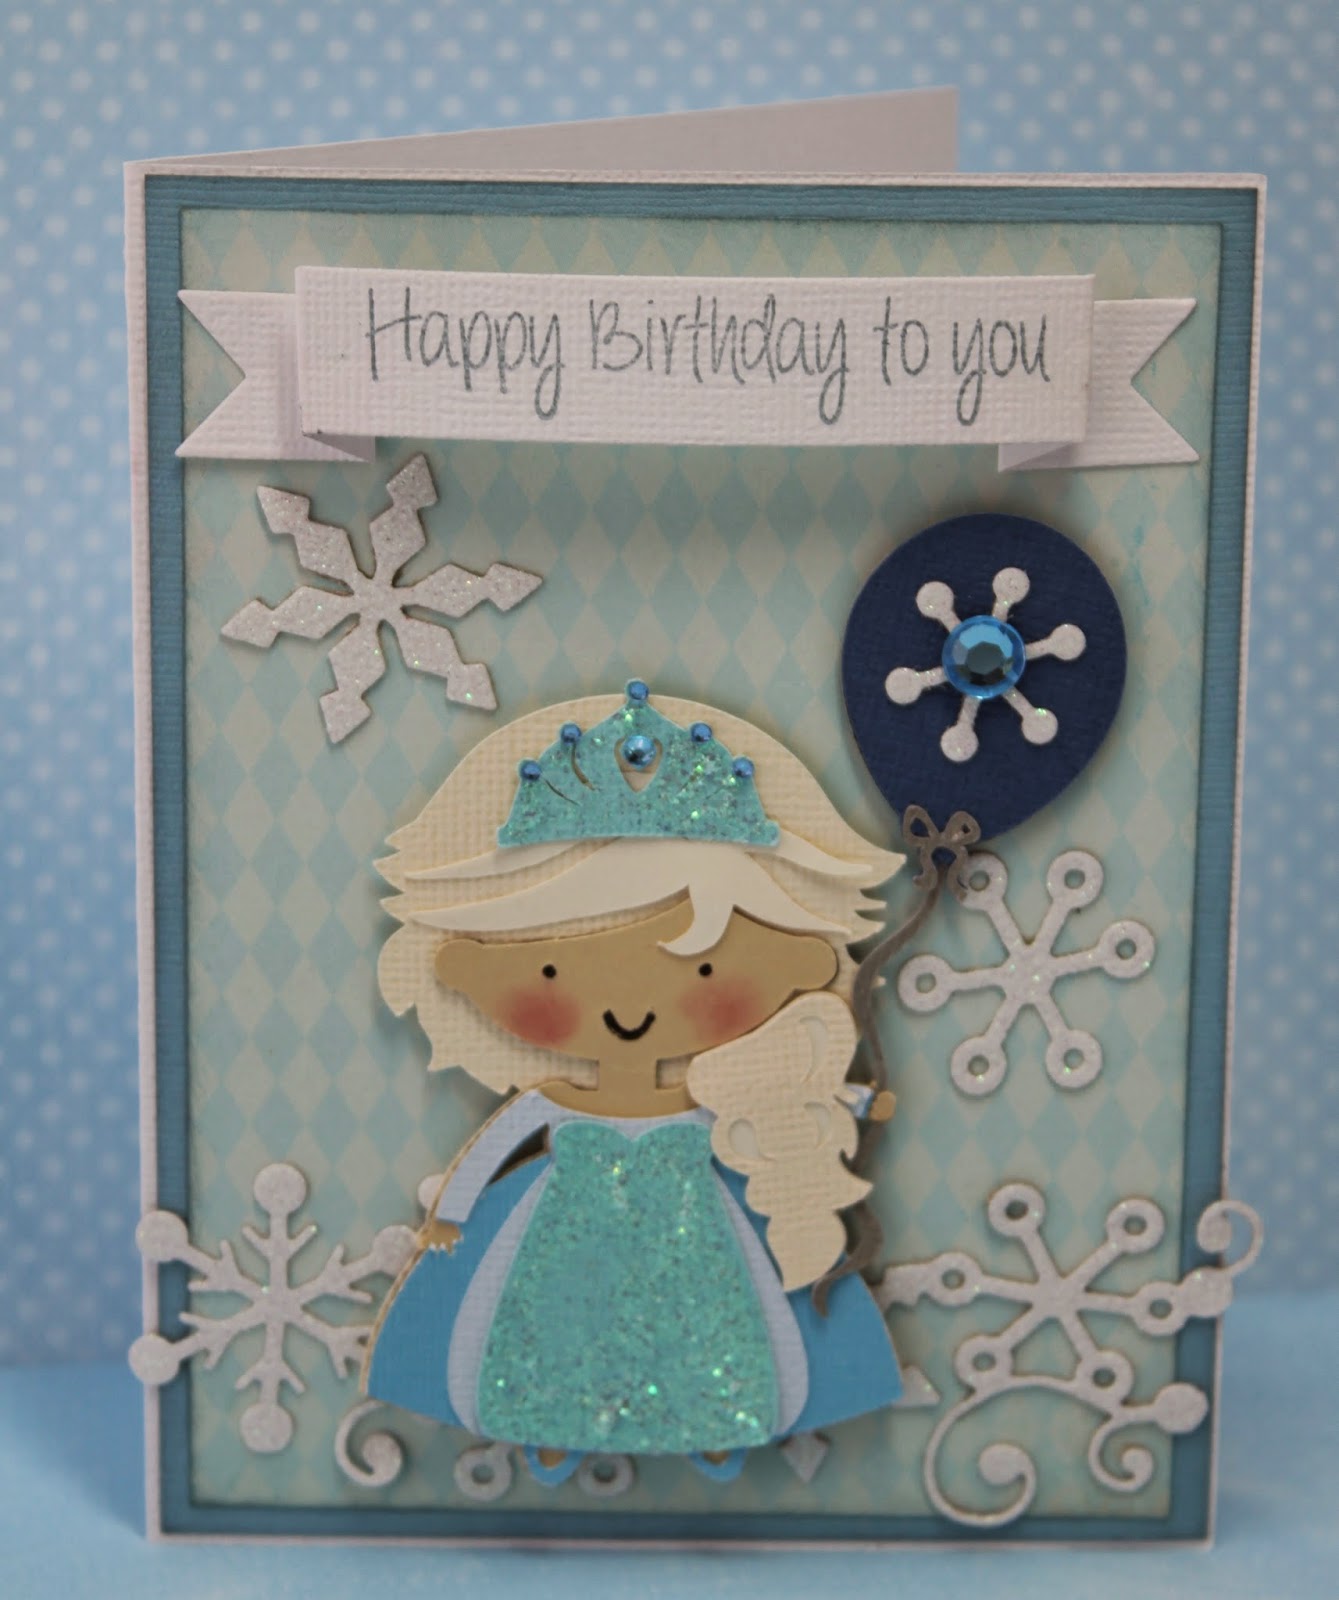 My Craft Spot: DT Post by Gwen - Beautiful Ice Princess birthday card!